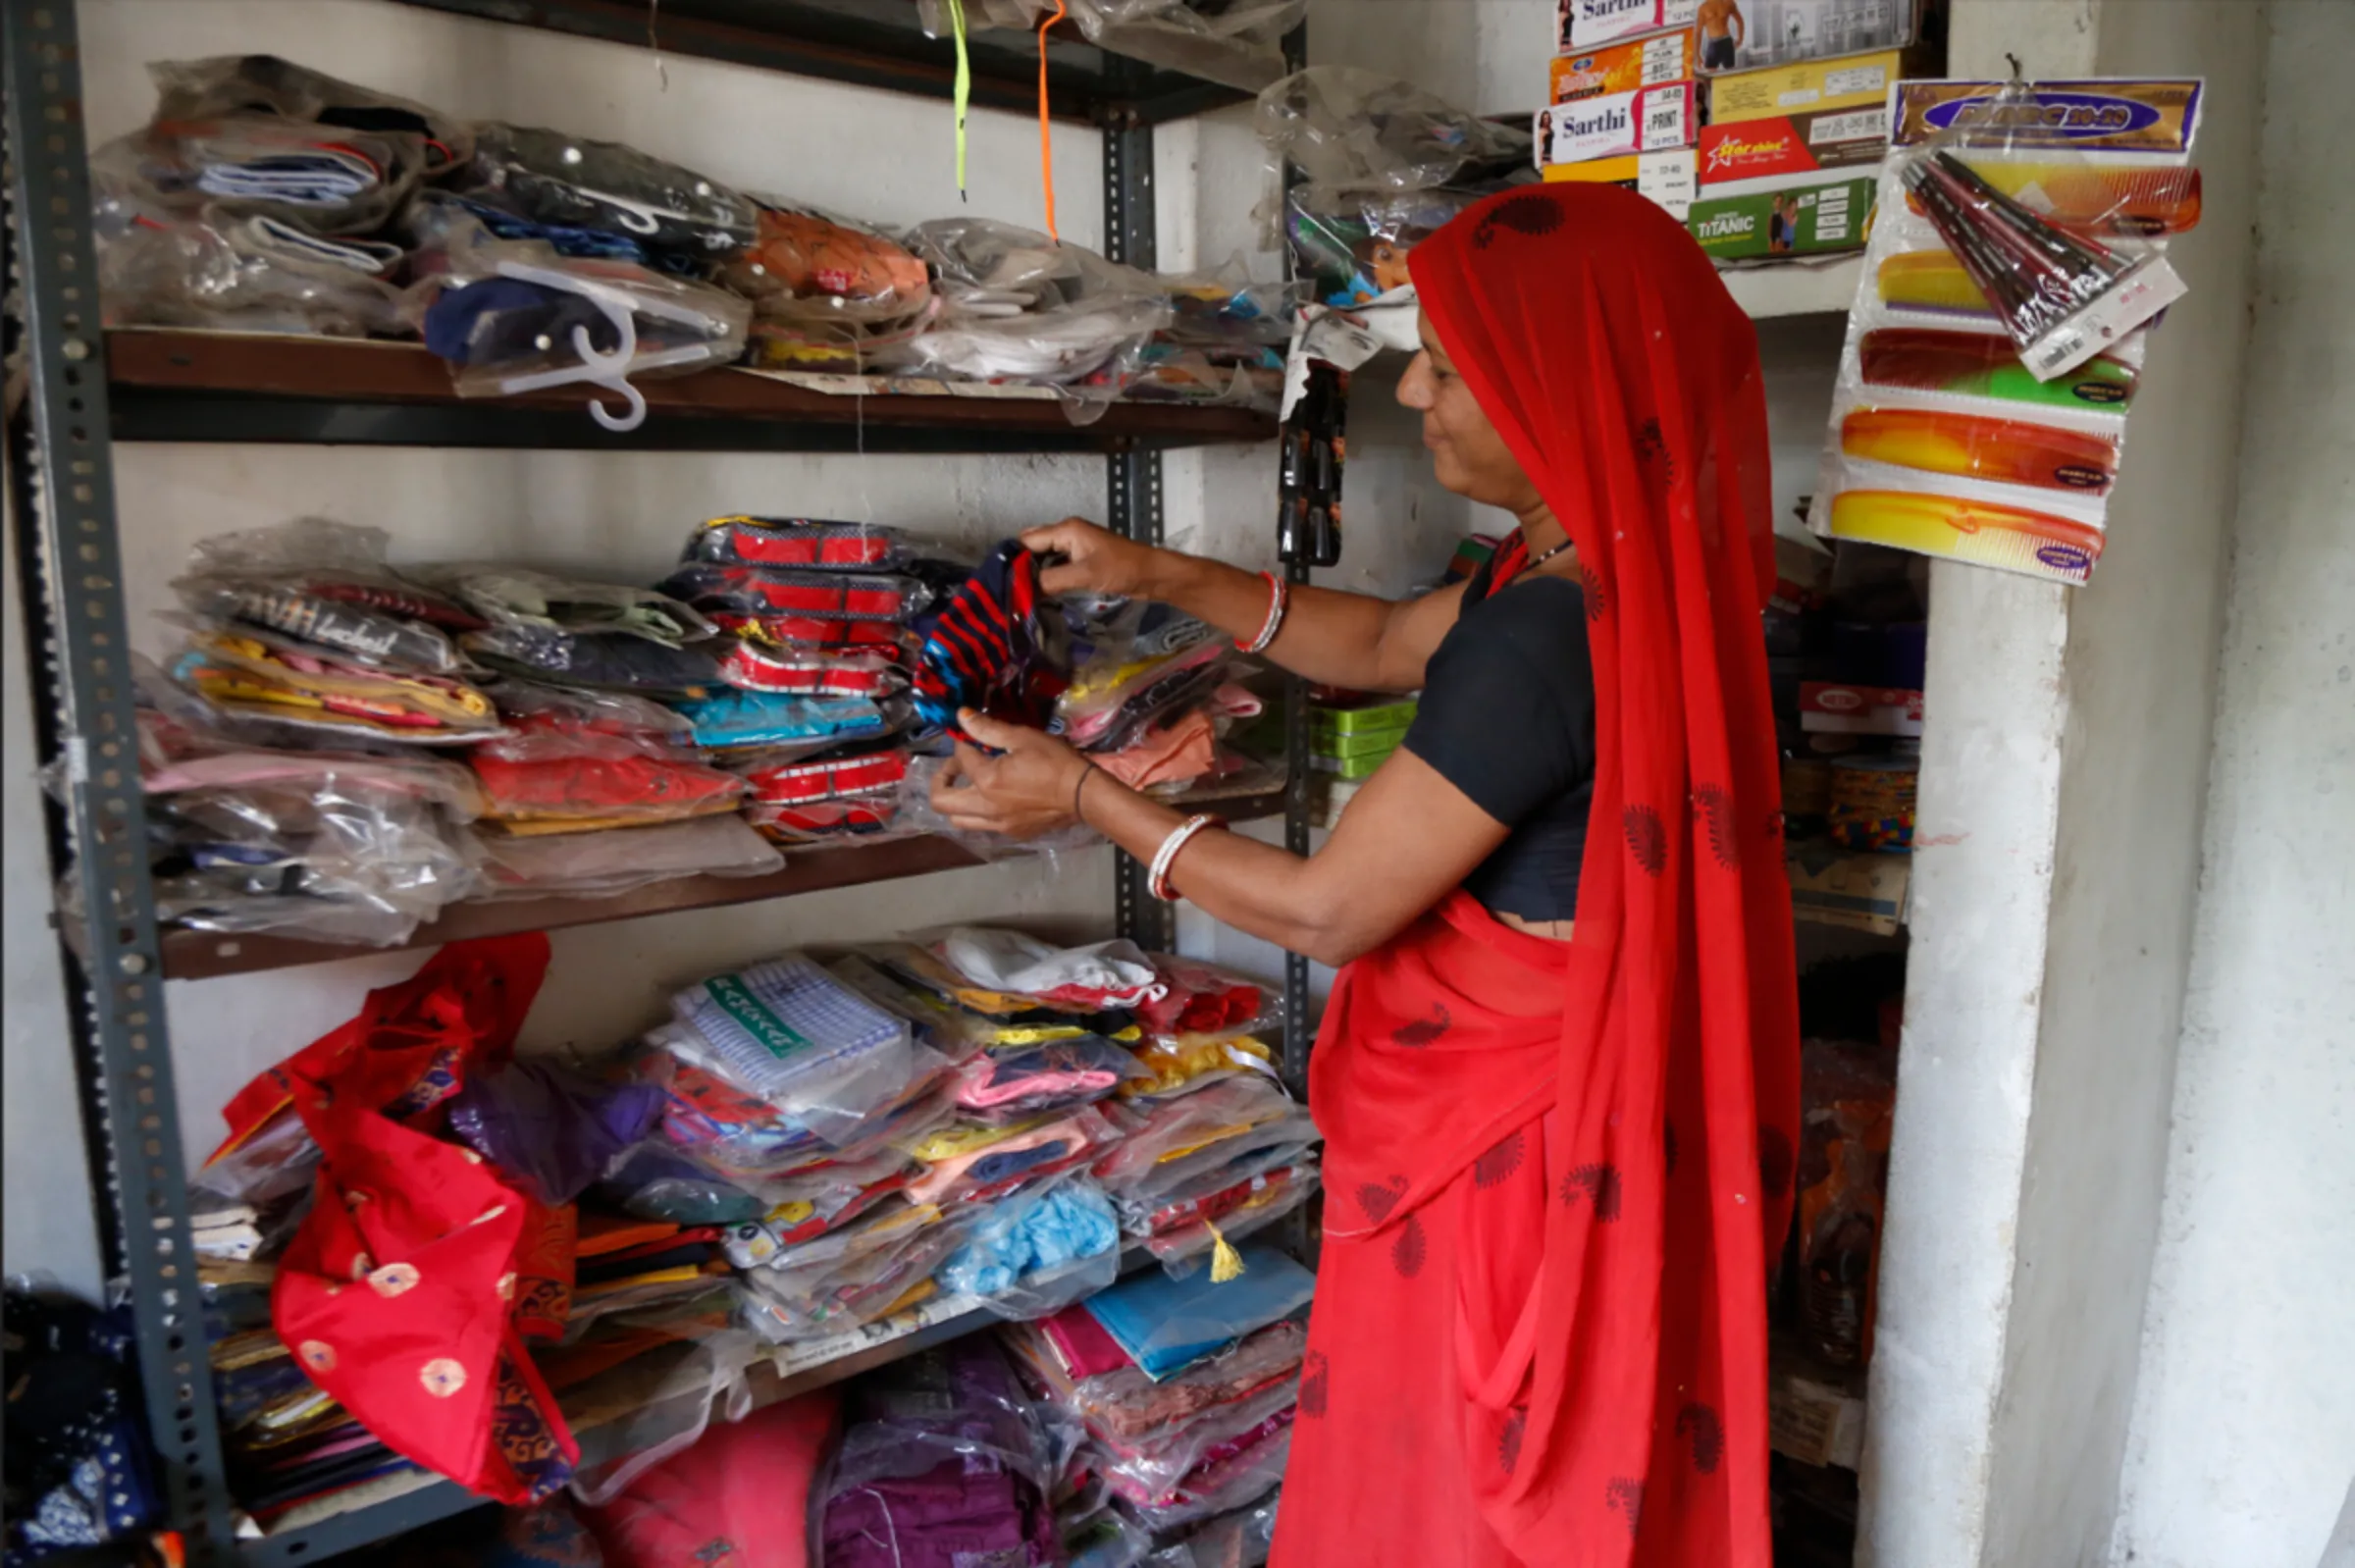 Chandrawati Rajpoot takes out a shirt from a plastic bag at her shop, which she opened with the help of a microloan, in Narela, Madhya Pradesh, November 10, 2022